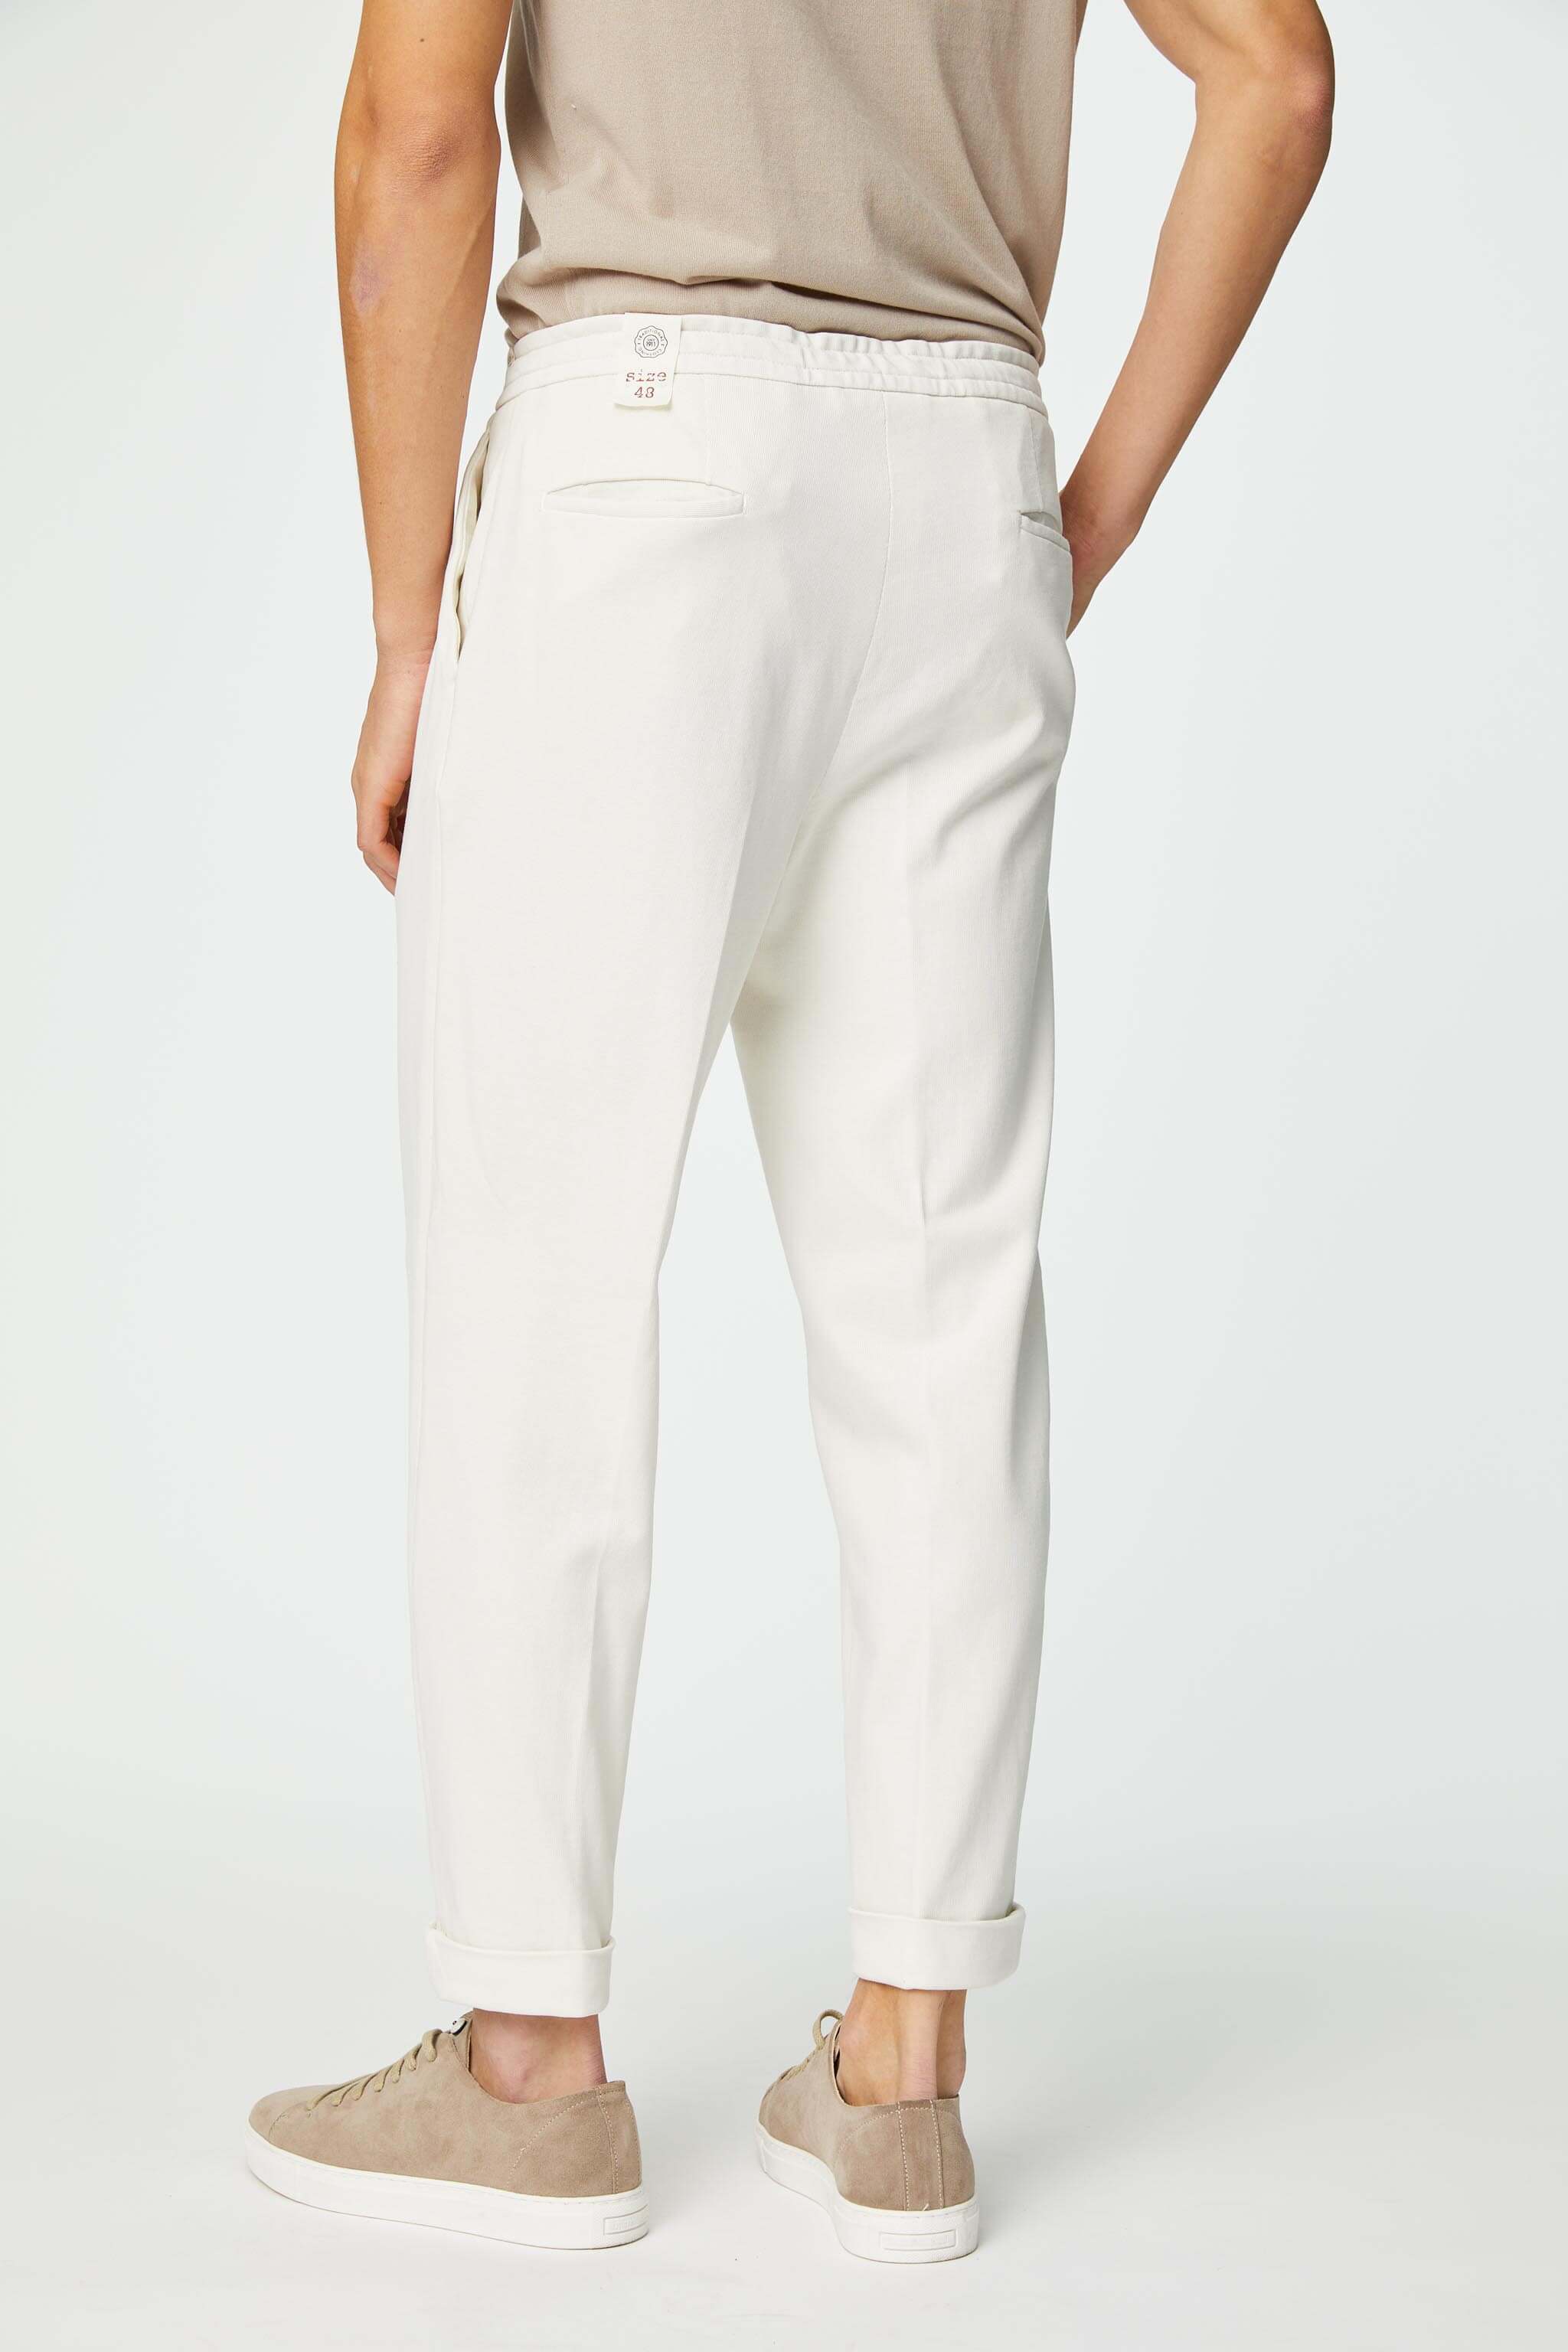 Garment-dyed LESTER pants in white